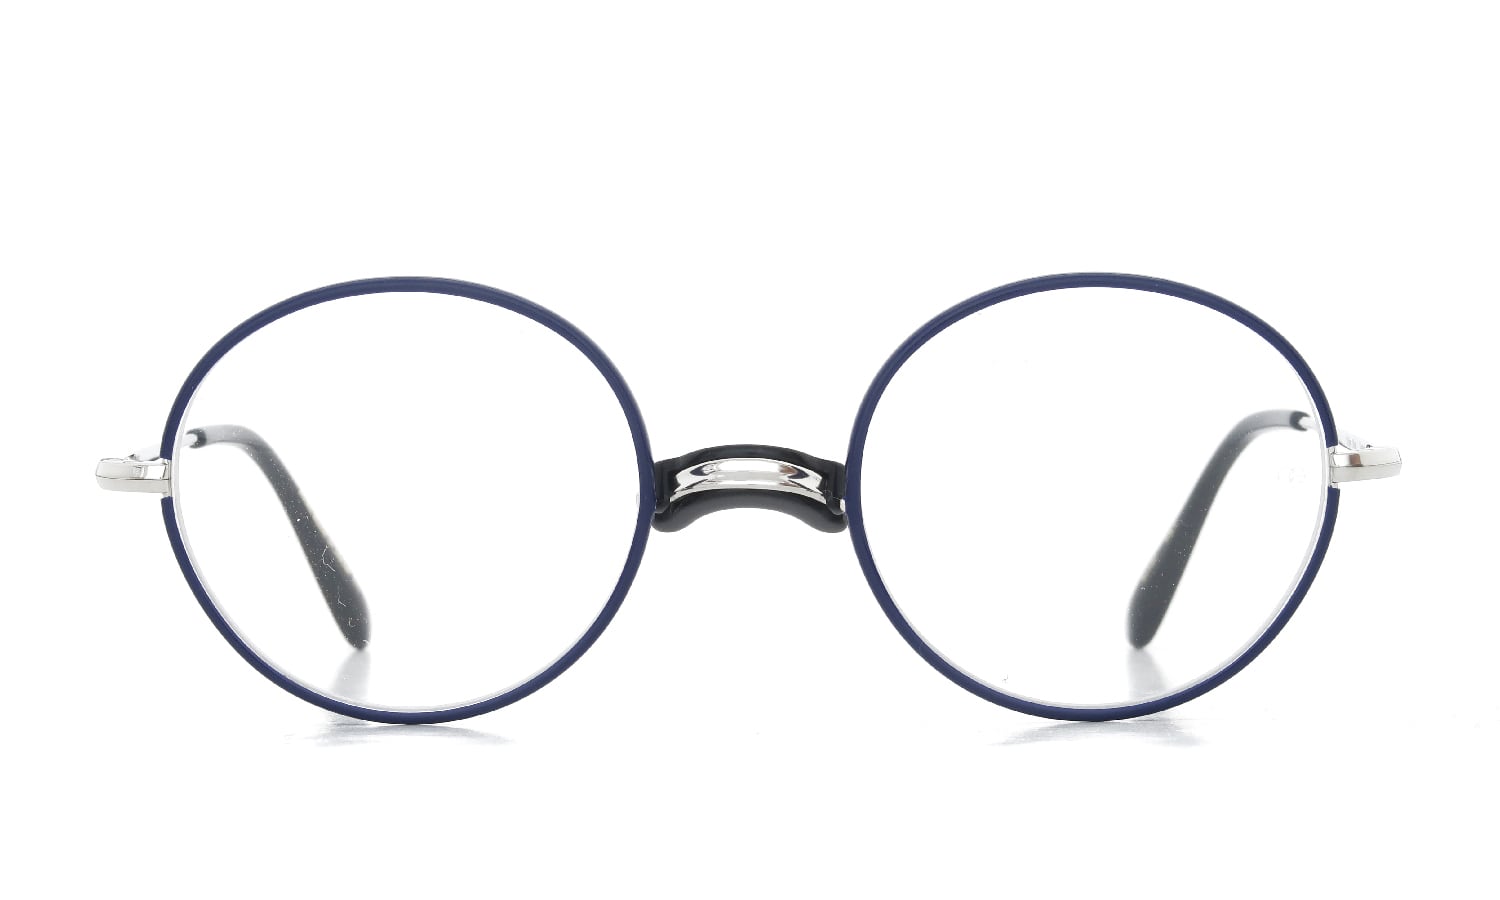 Oliver Goldsmith 海外モデル メガネ Oliver Oban with Pad Silver RNV 48size